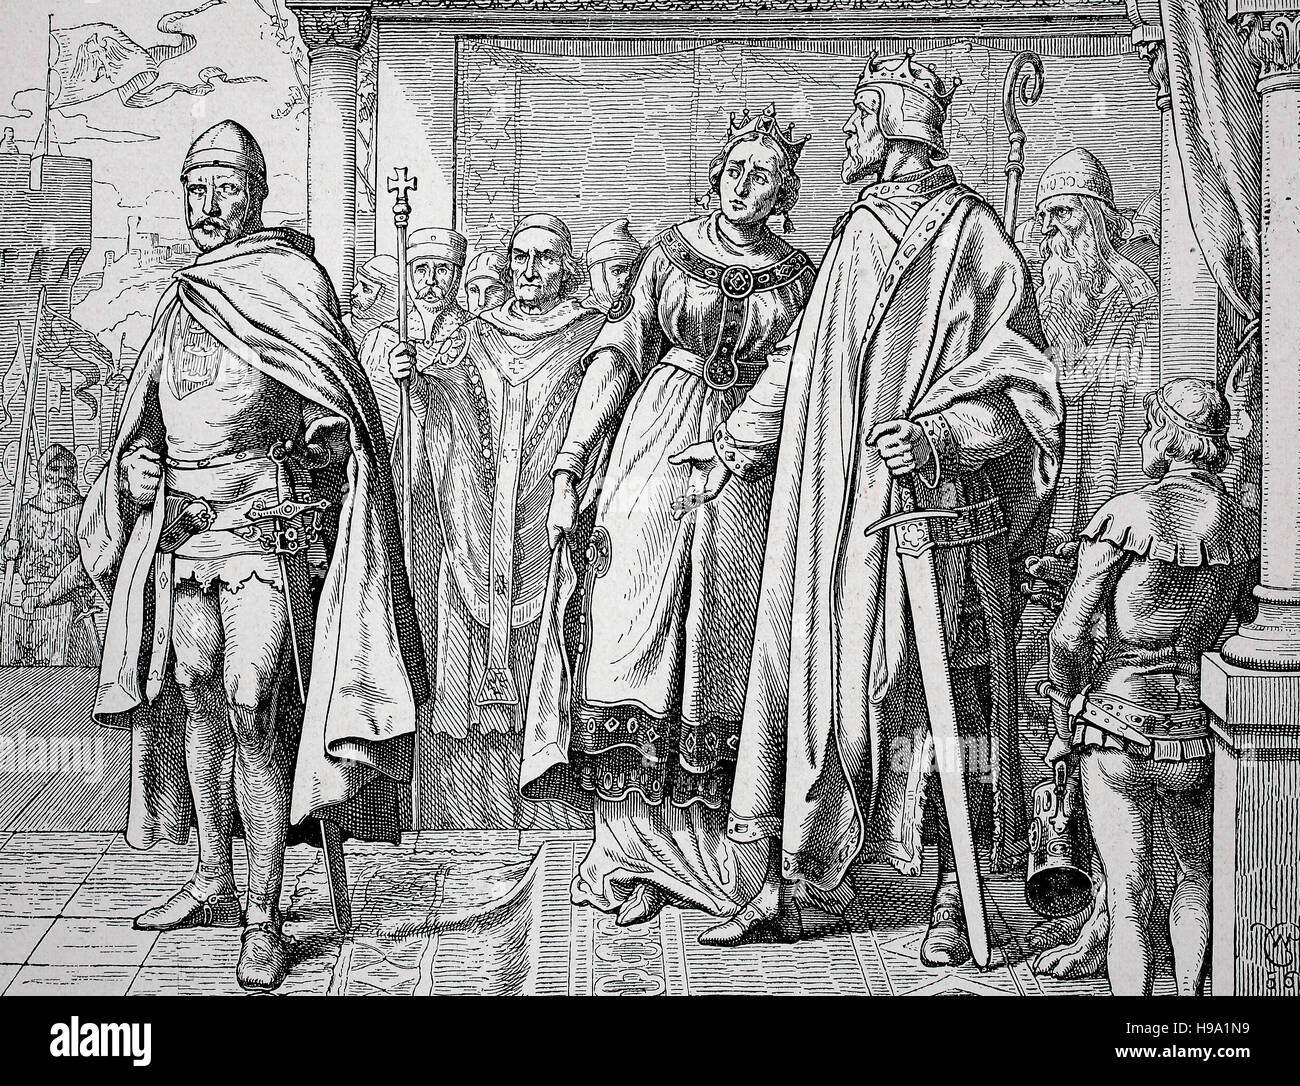 Ernest II, died 17 August 1030, Duke of Swabia and Conrad II, 990 - 4 June 1039, also known as Conrad the Elder and Conrad the Salic, was Emperor of the Holy Roman Empire, at Ingelheim, Germany, historical illustration Stock Photo